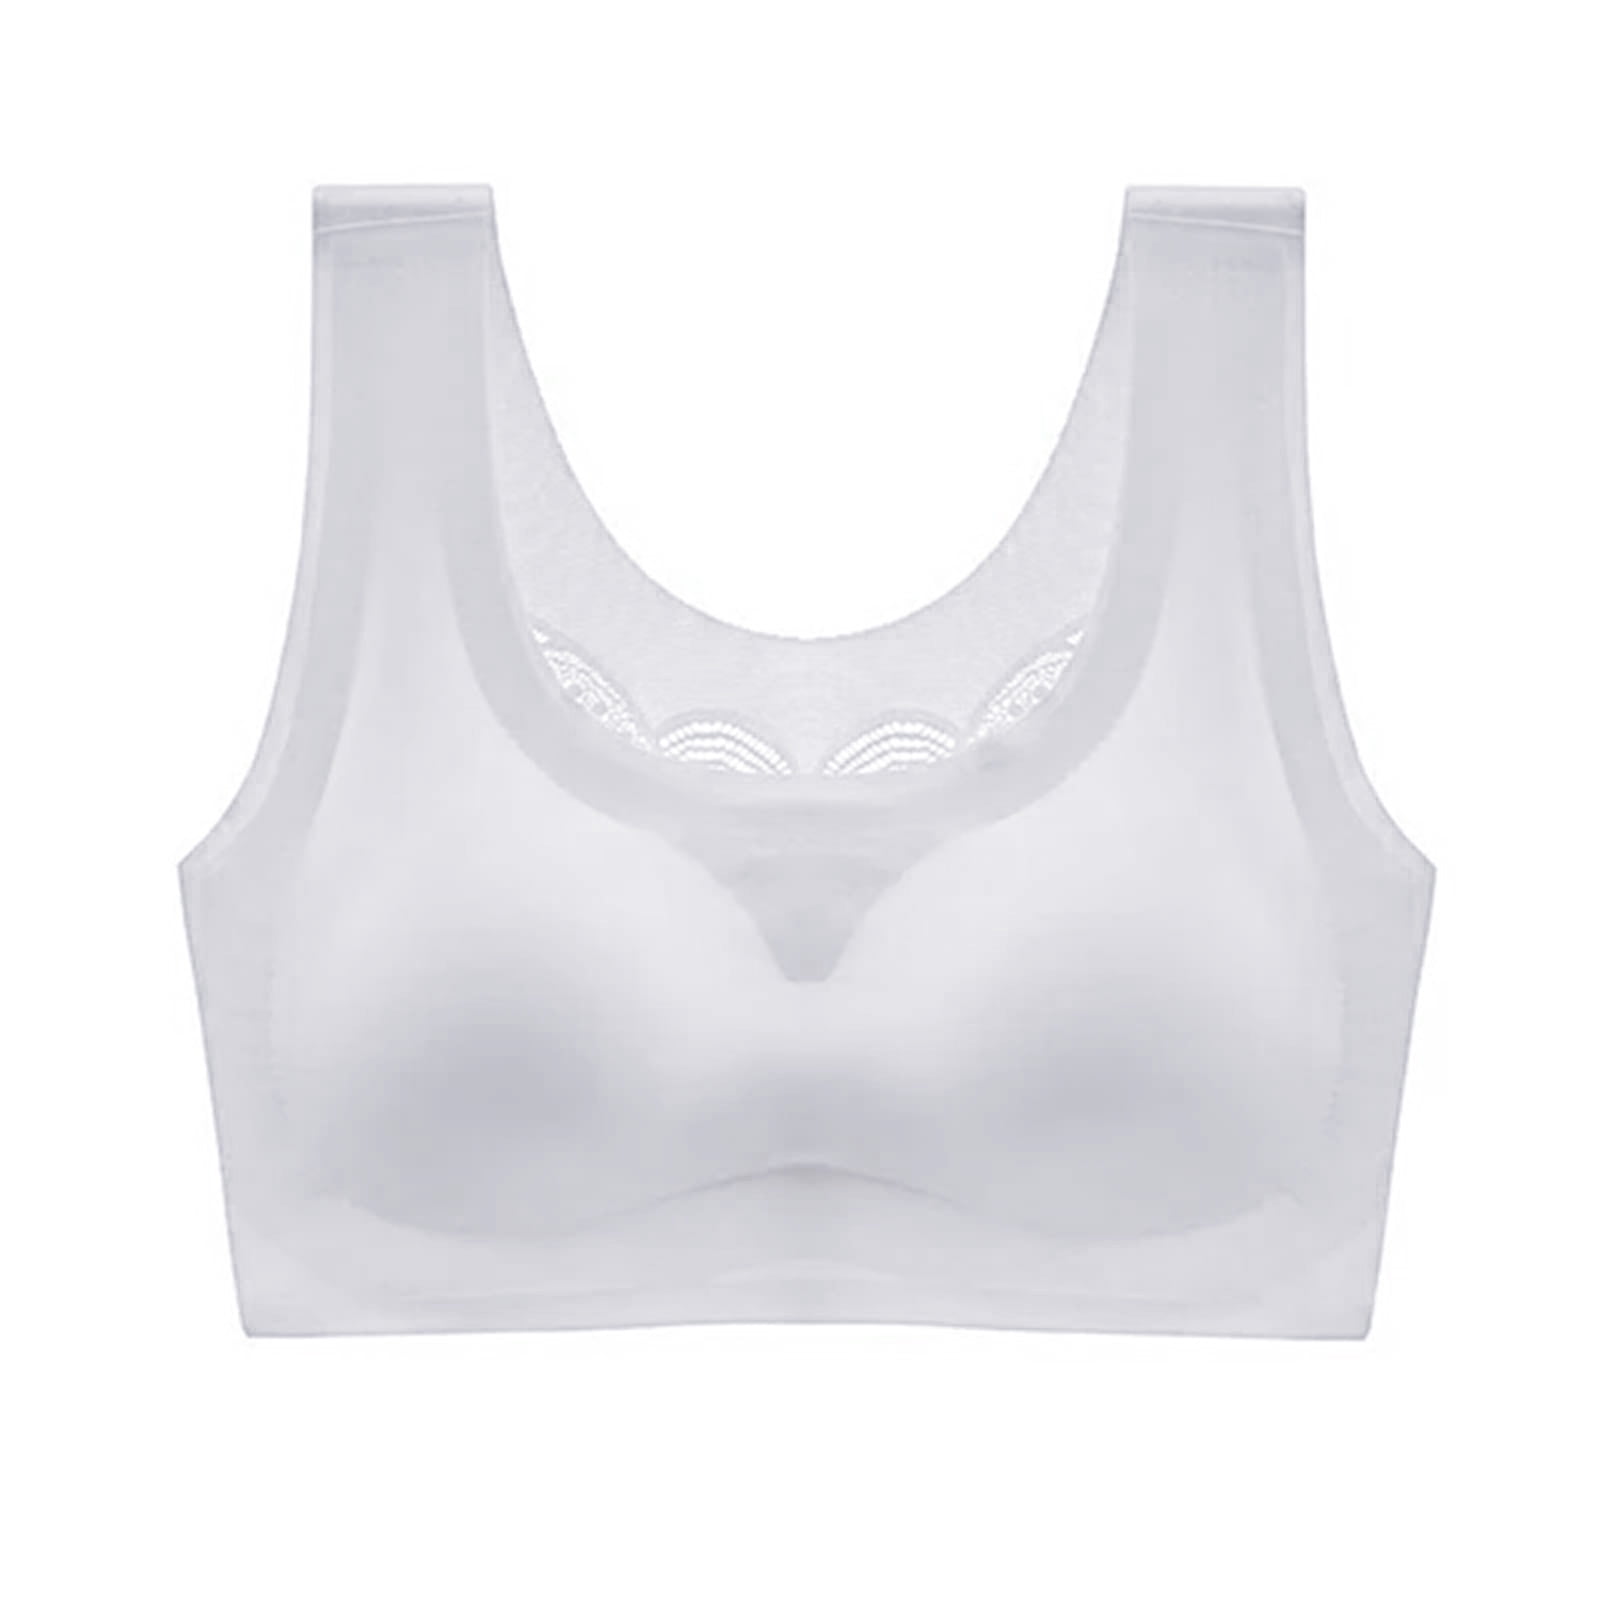 Bras For Women Ultra Thin Ice Silk Bra Comfortable Plus Size Seamless  Wireless Sports Bra With Removable Pads 